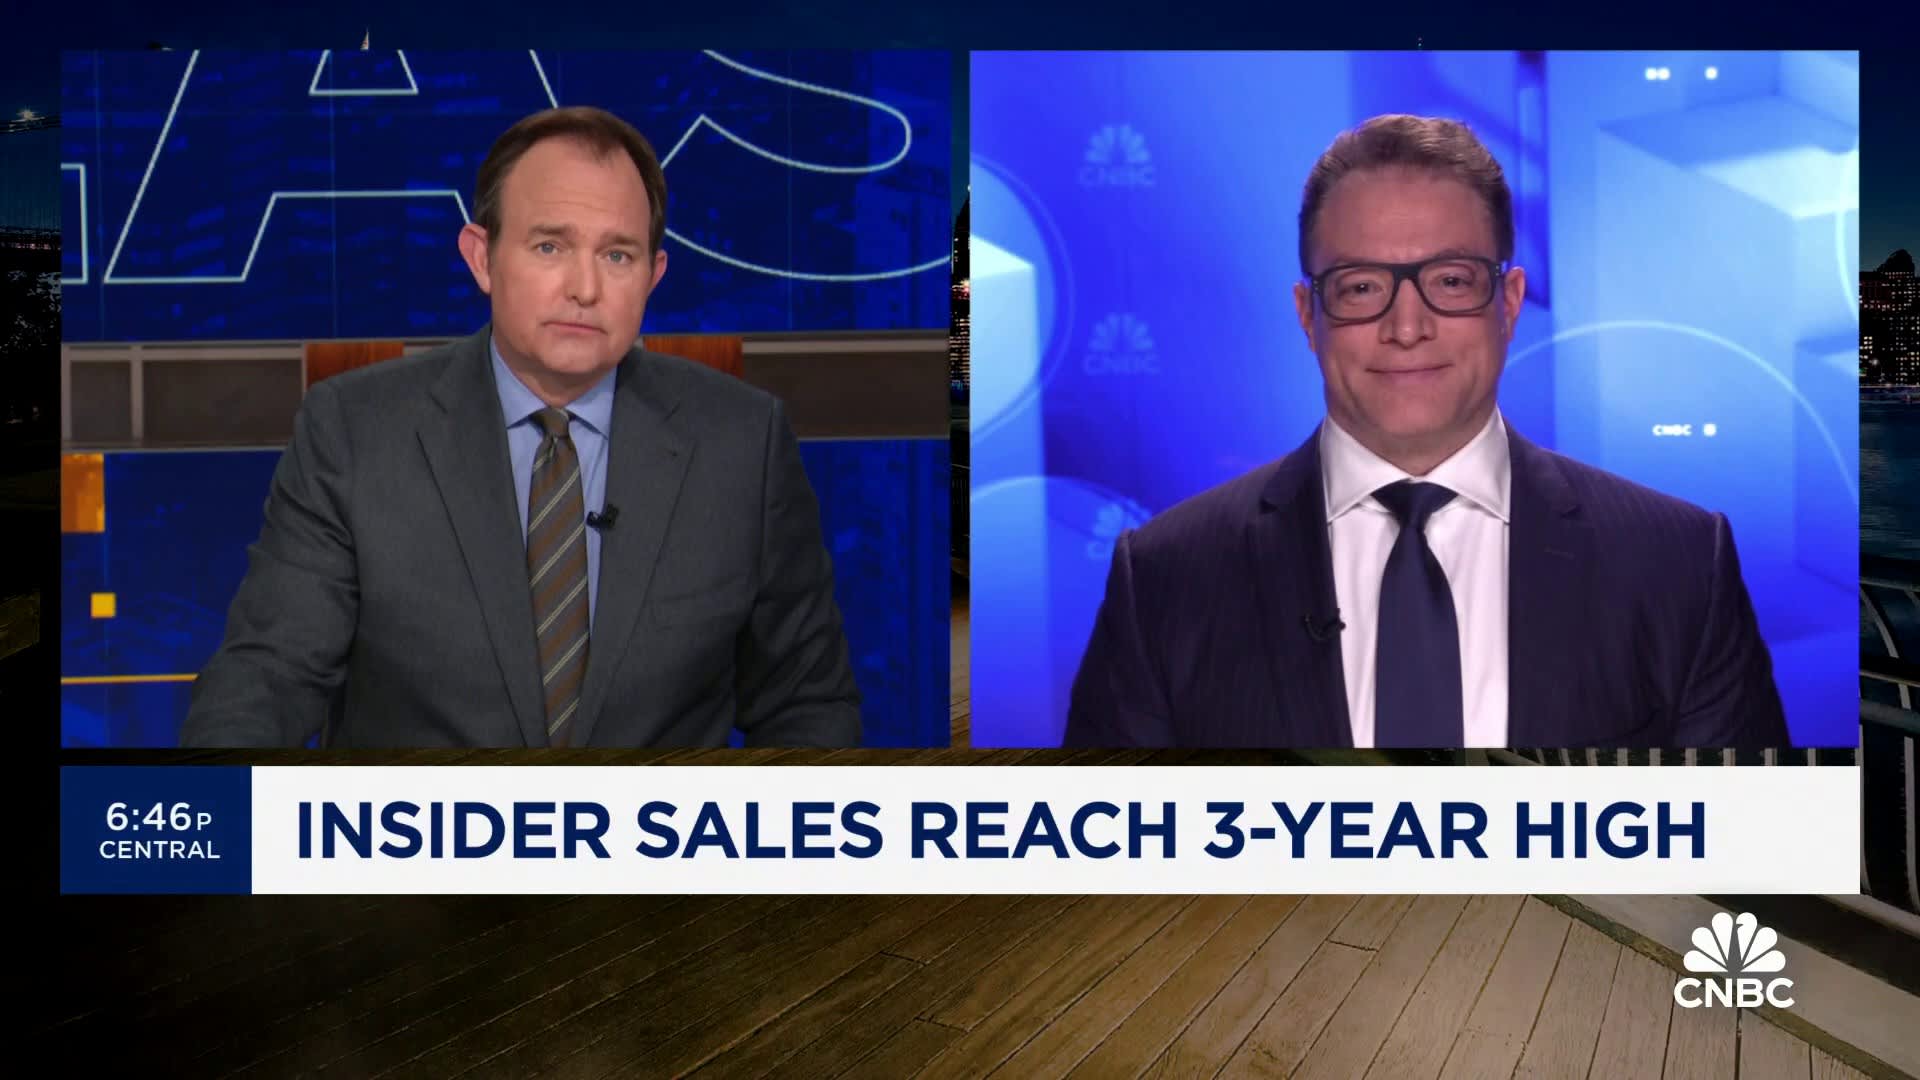 Insider sales reach 3-year high: Here's what to know